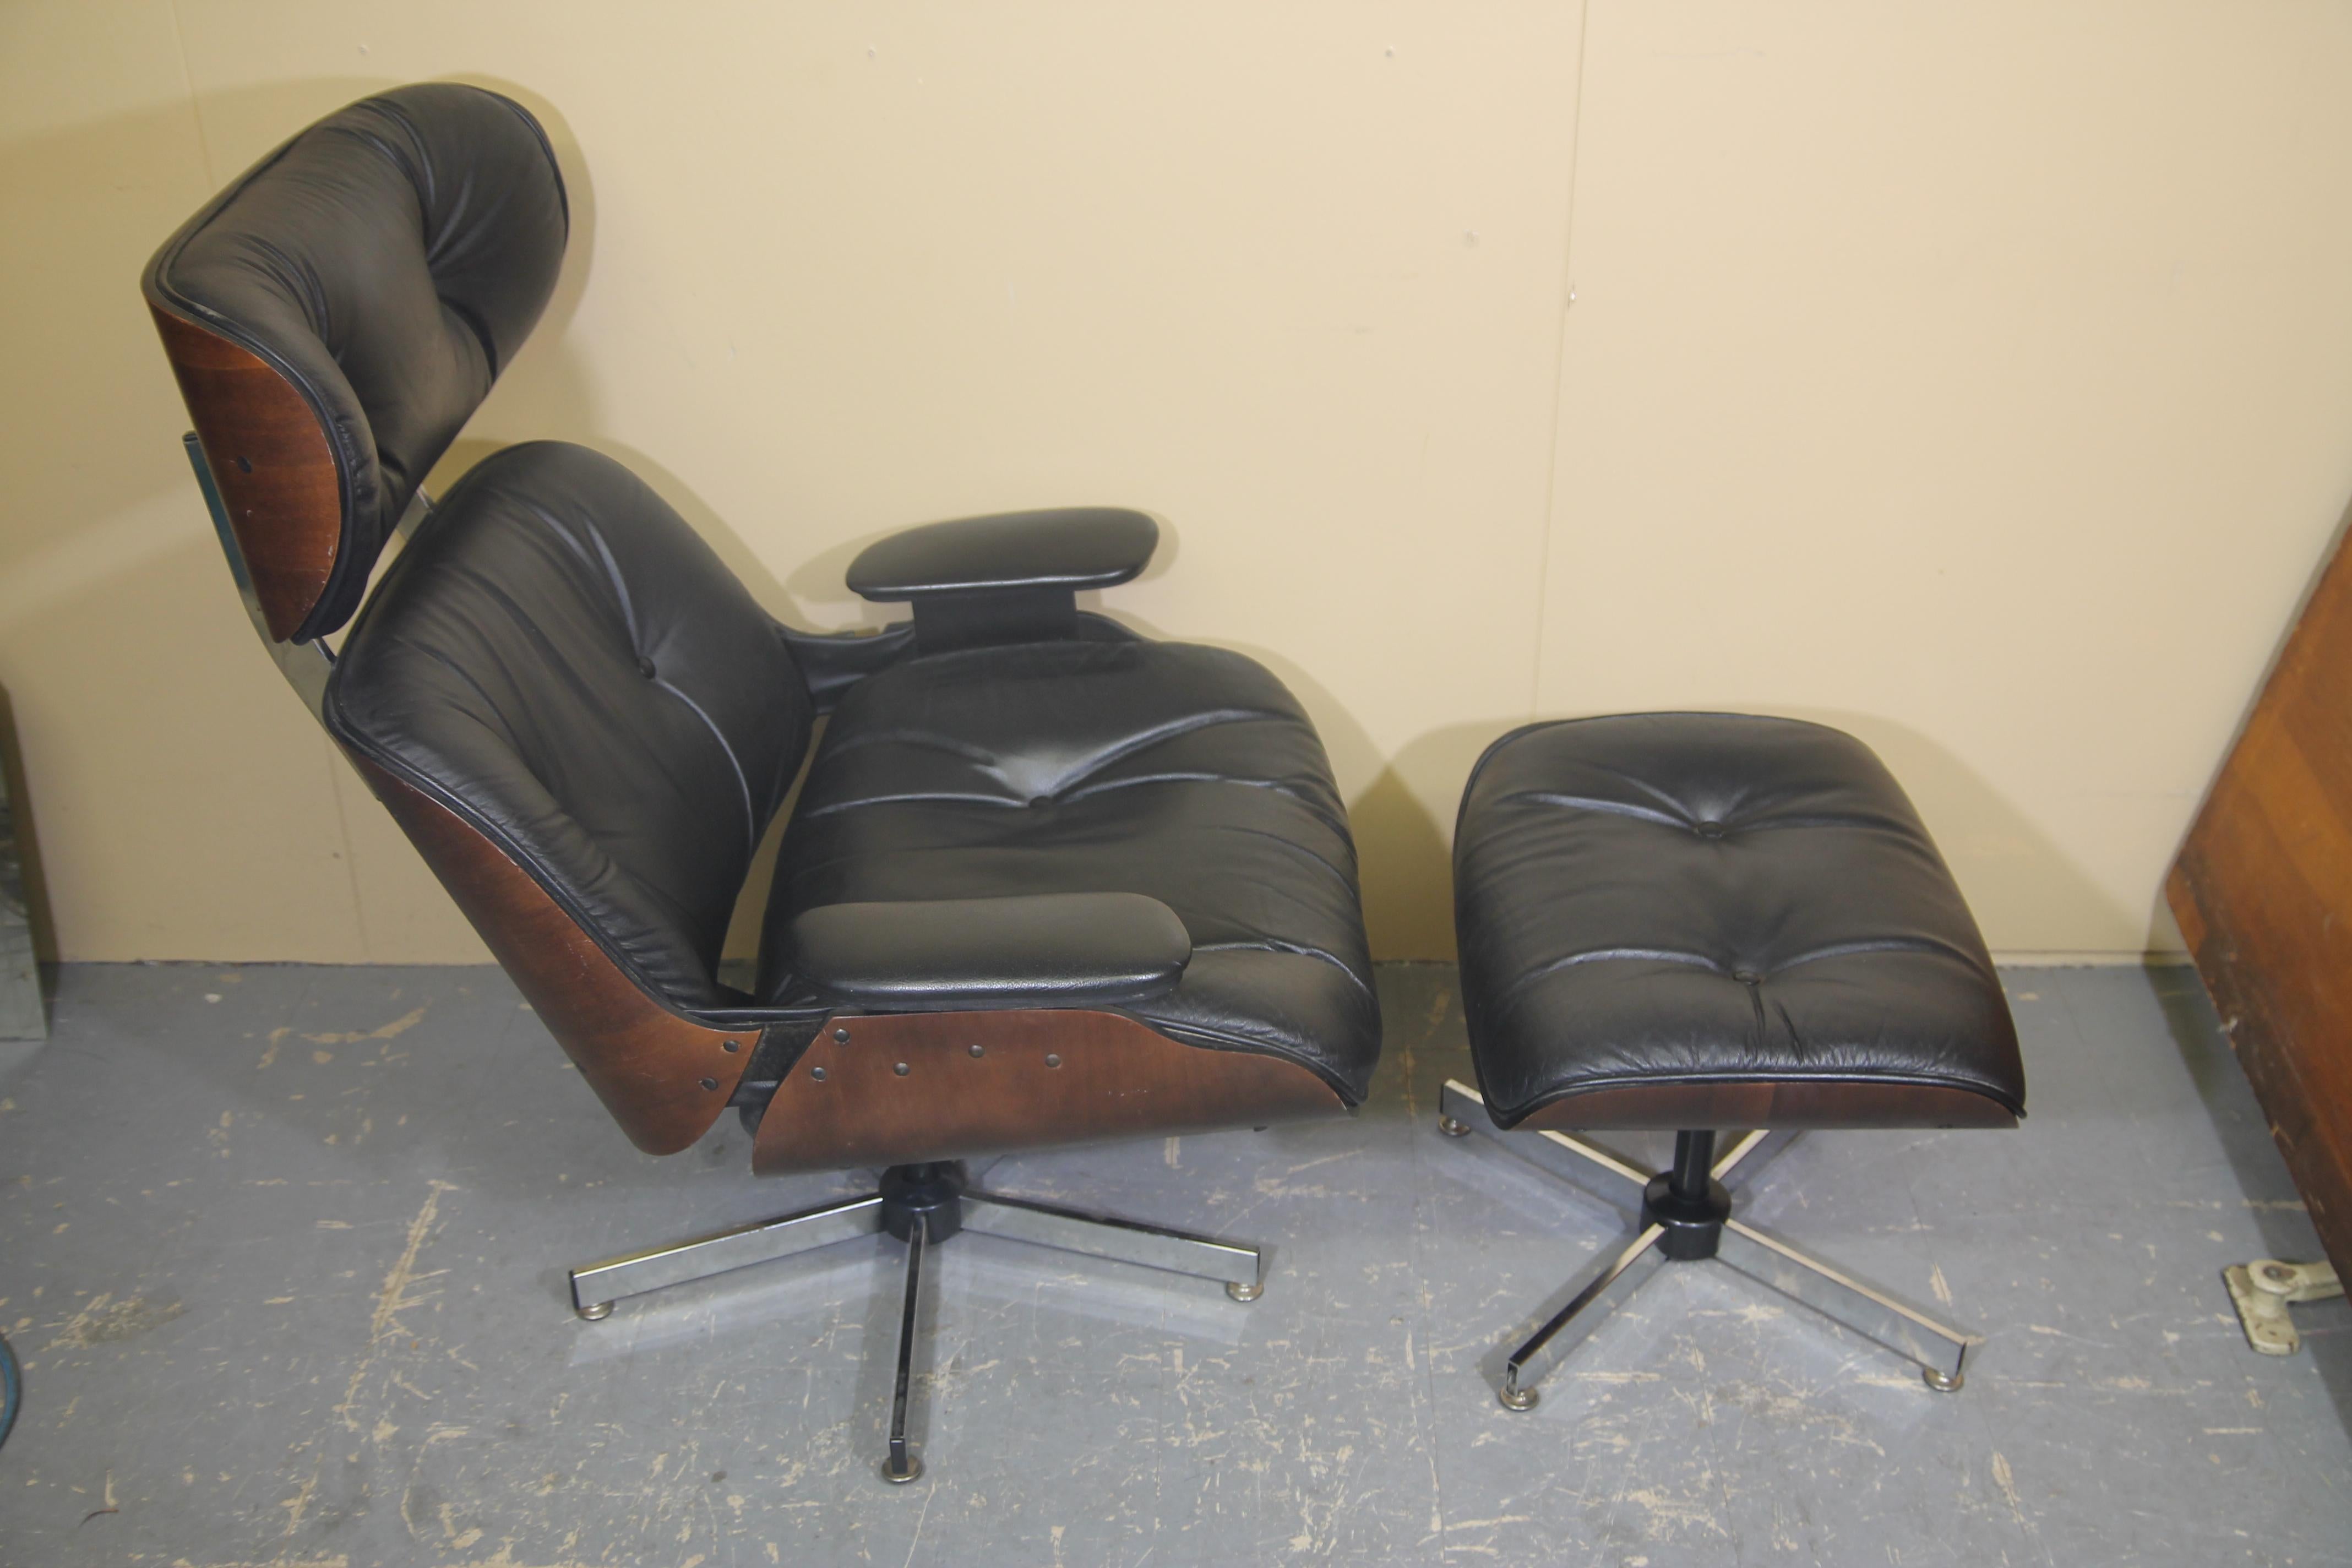 Nice Plycraft chair and ottoman in the style of the famous Eames 670/671 Lounge chair in ottoman. Chair and ottoman are in nice shape and retain the original Plycraft tags on the bottom of the chair. Great addition to any home